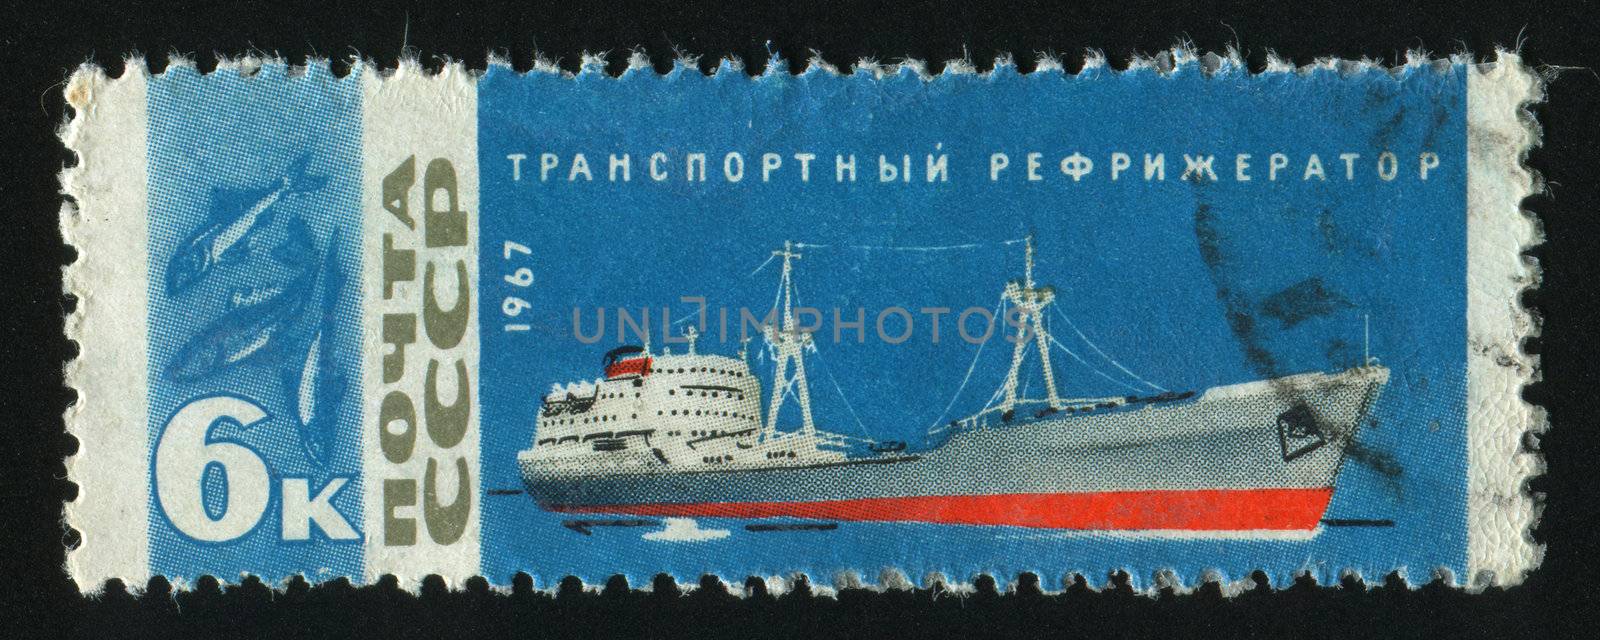 RUSSIA - CIRCA 1967: stamp printed by Russia, shows Trawler Fish Factory, circa 1967.